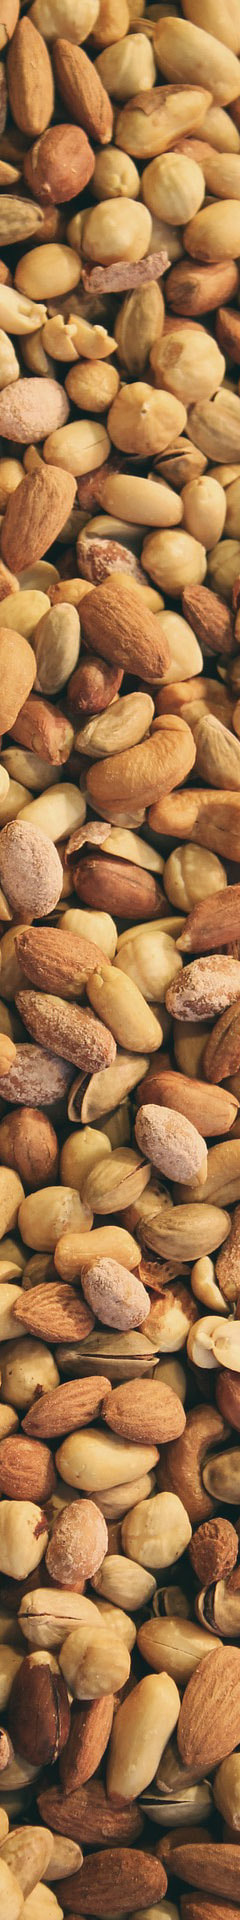 Mixed Nuts Picture